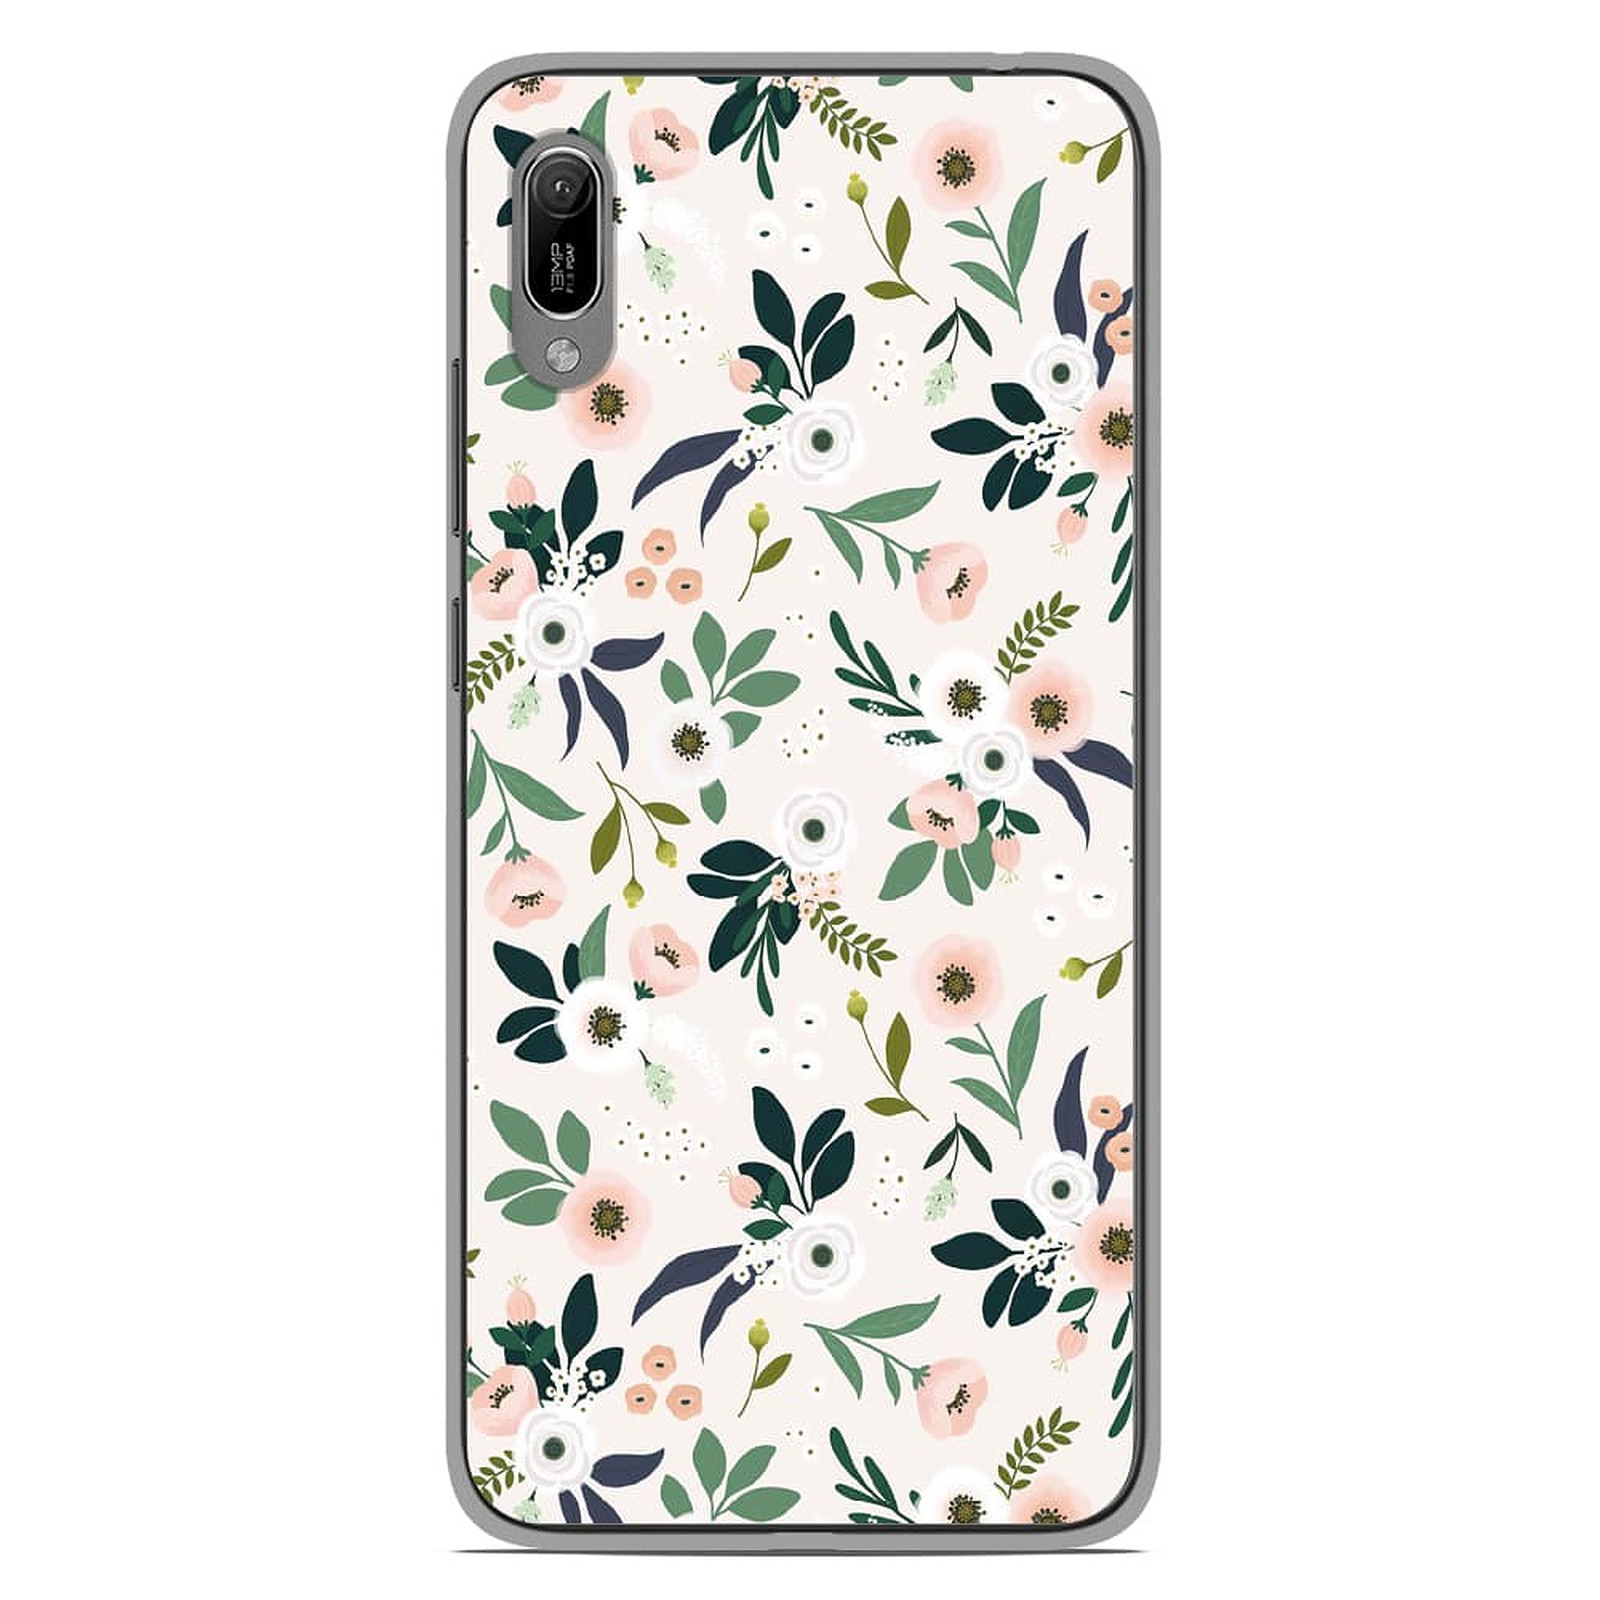 1001 Coques Coque silicone gel Huawei Y6 2019 motif Flowers - Coque telephone 1001Coques